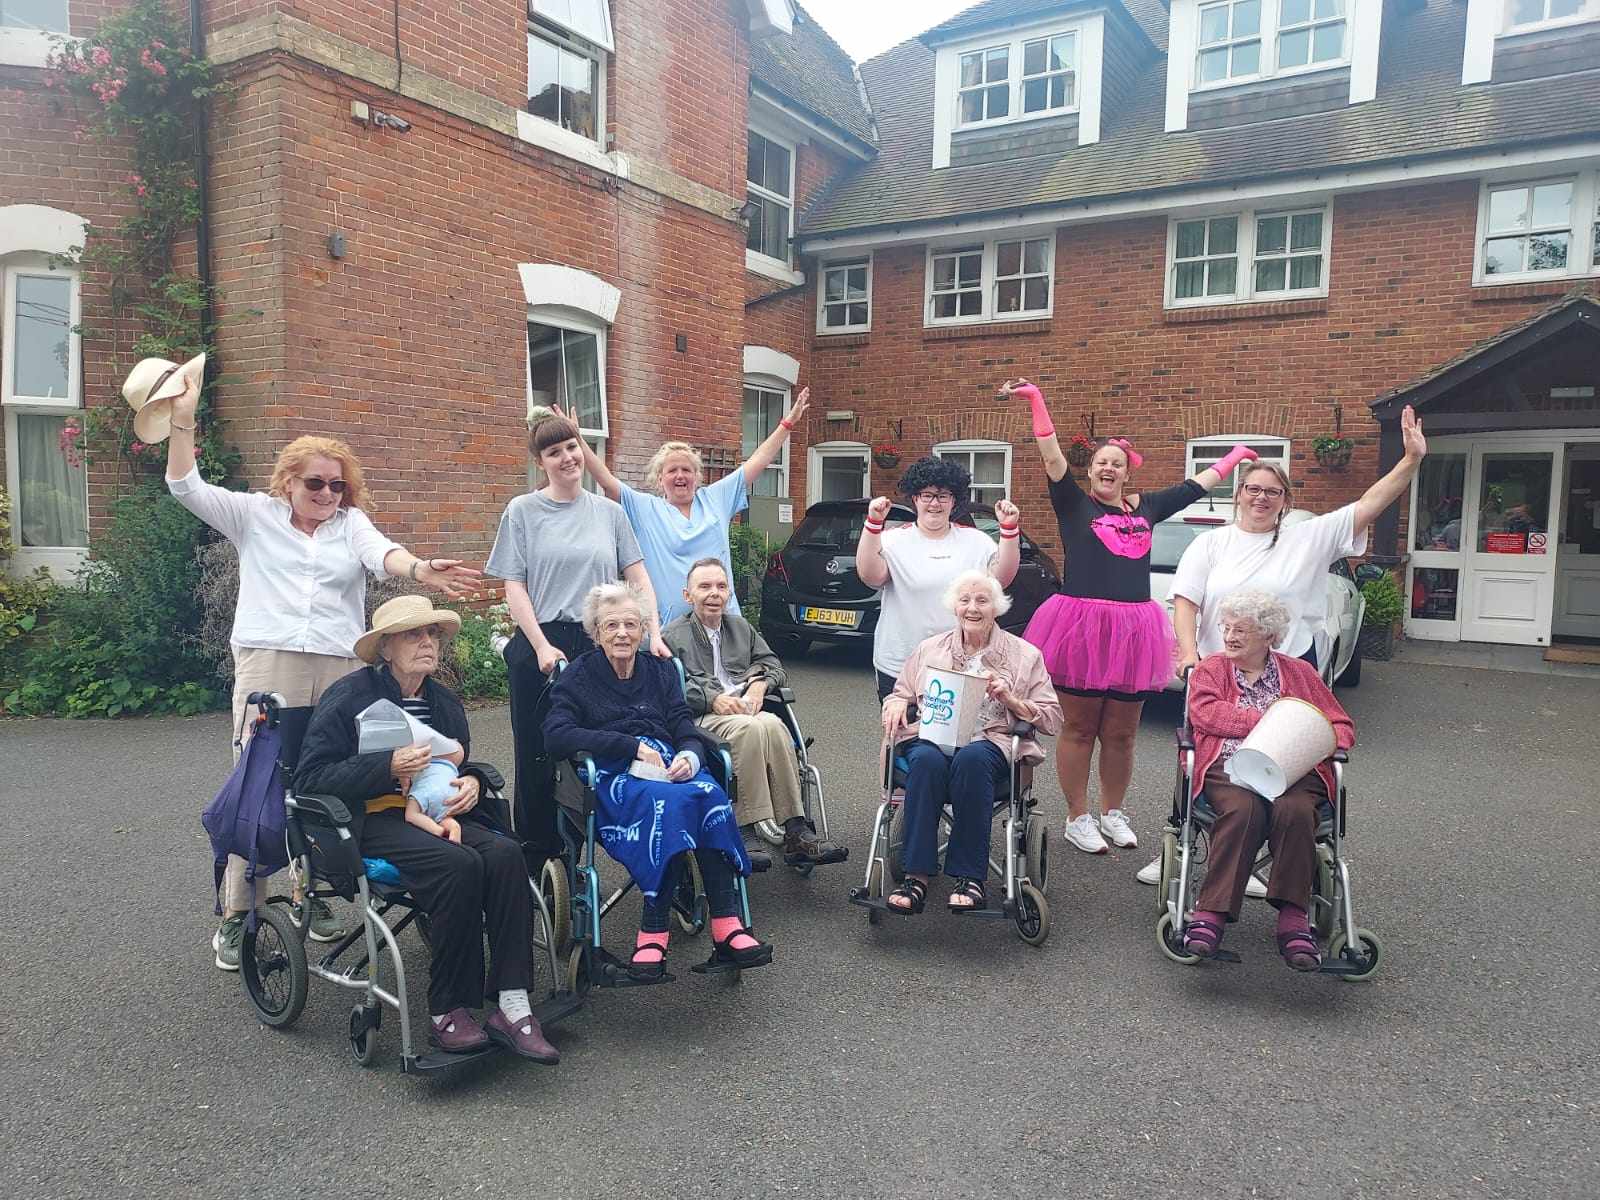 Staff and residents raising their arms in delight following the walk